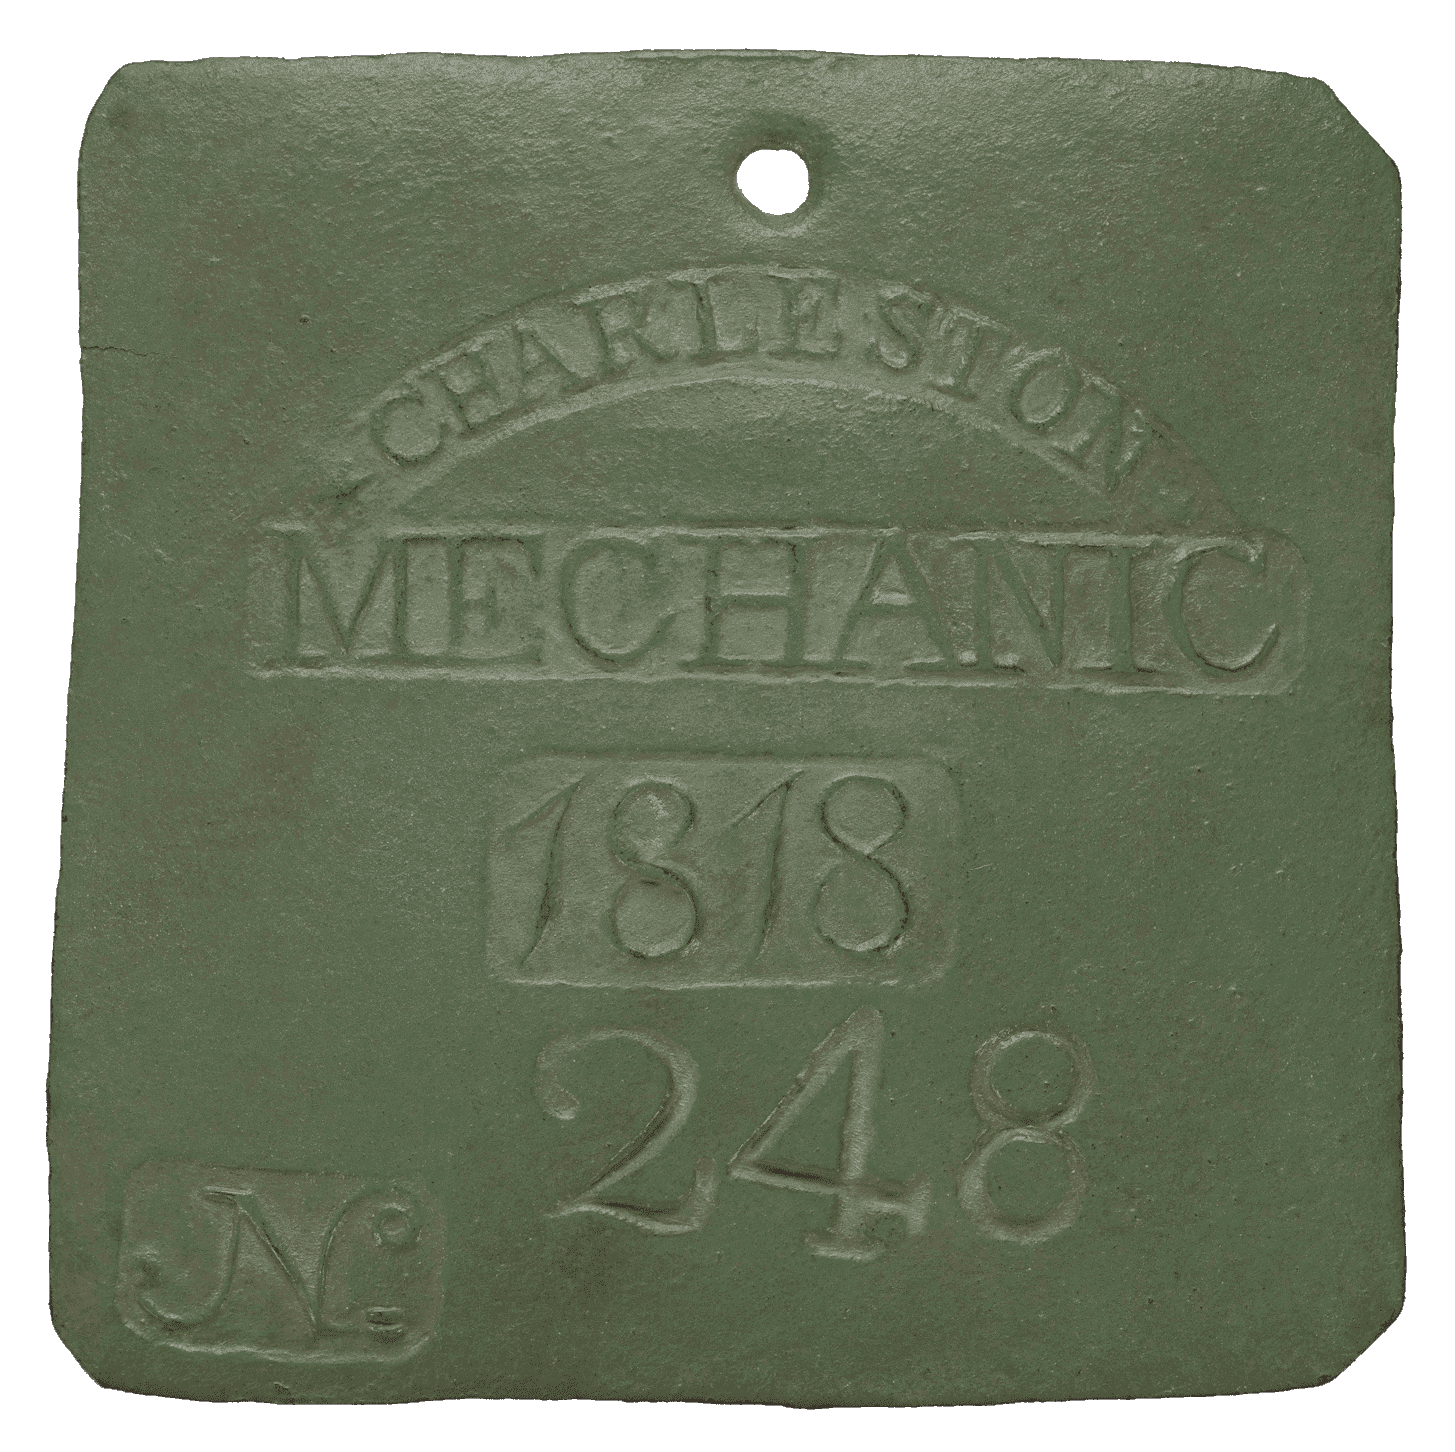 Square metal badge with clipped corners.  "Charleston / Mechanic / 1818 / 248" is stamped on the badge.